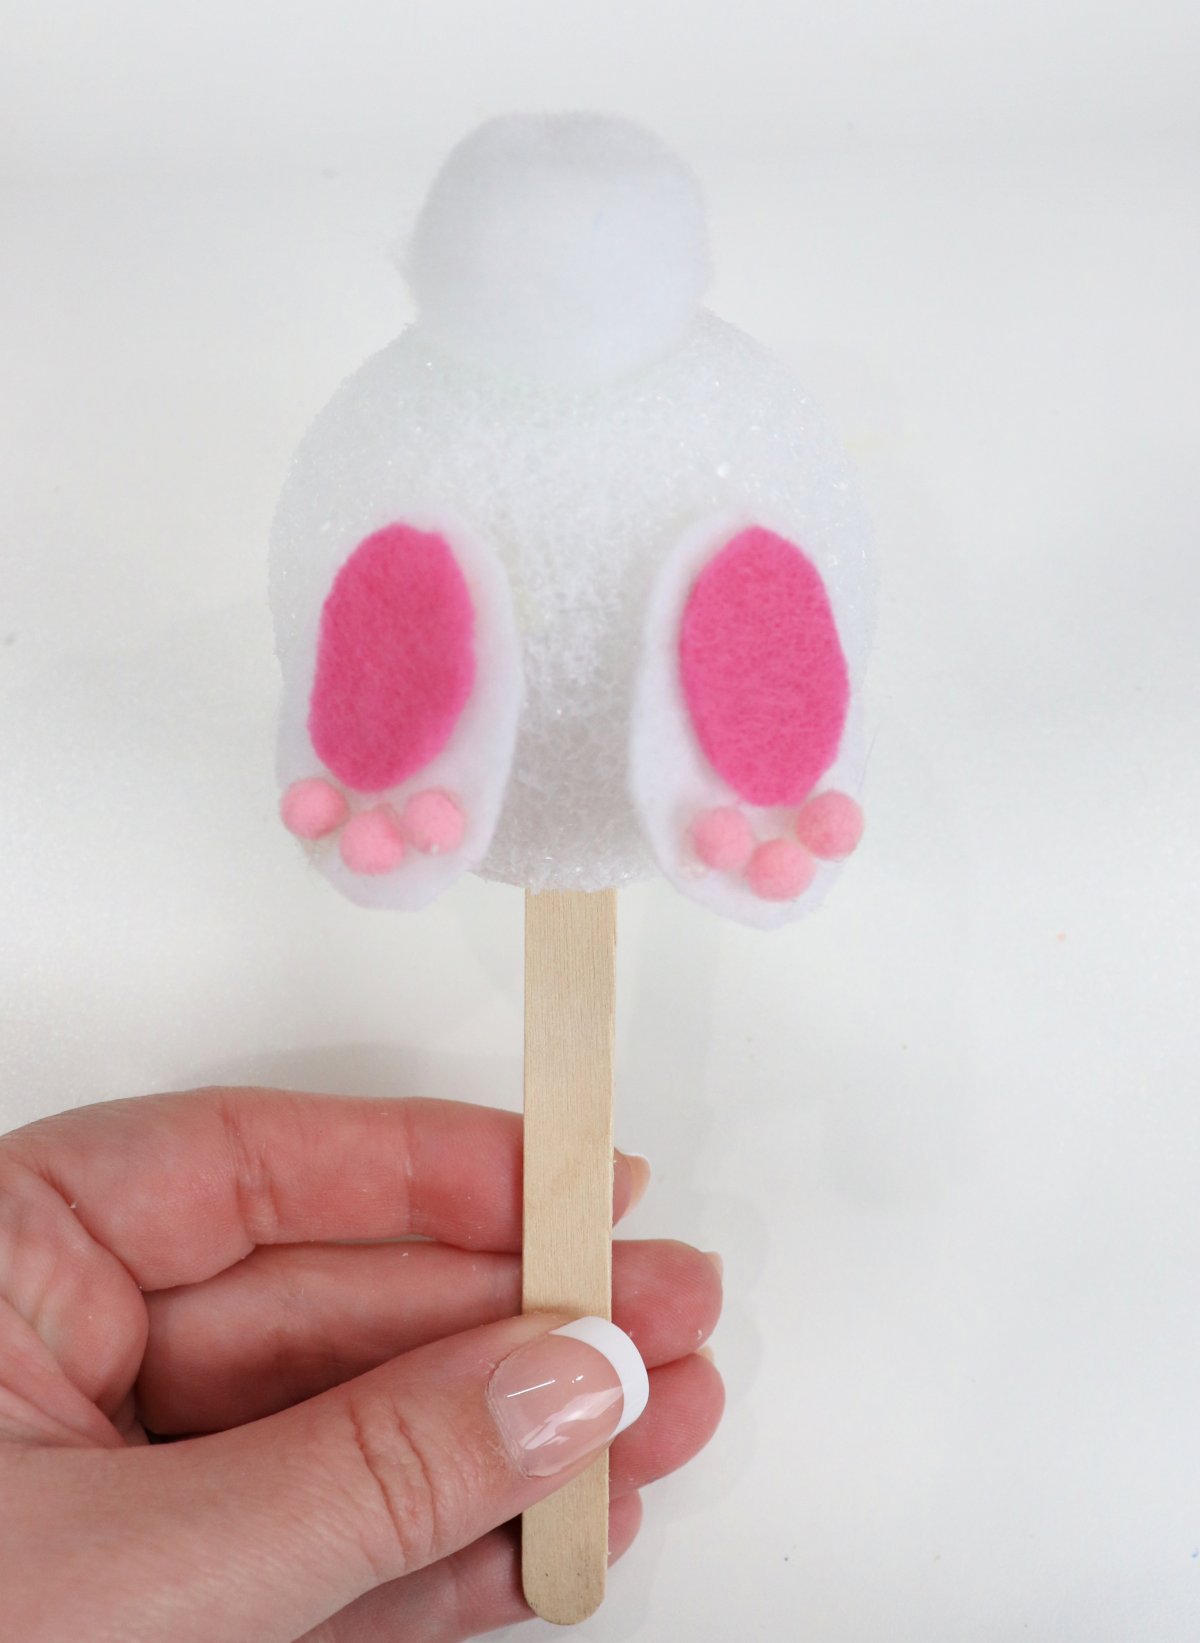 Image contains Amy's hand holding the bunny bottom made of a styrofoam ball with a white pom-pom tail, and pink and white felt feet, on a wooden craft stick.